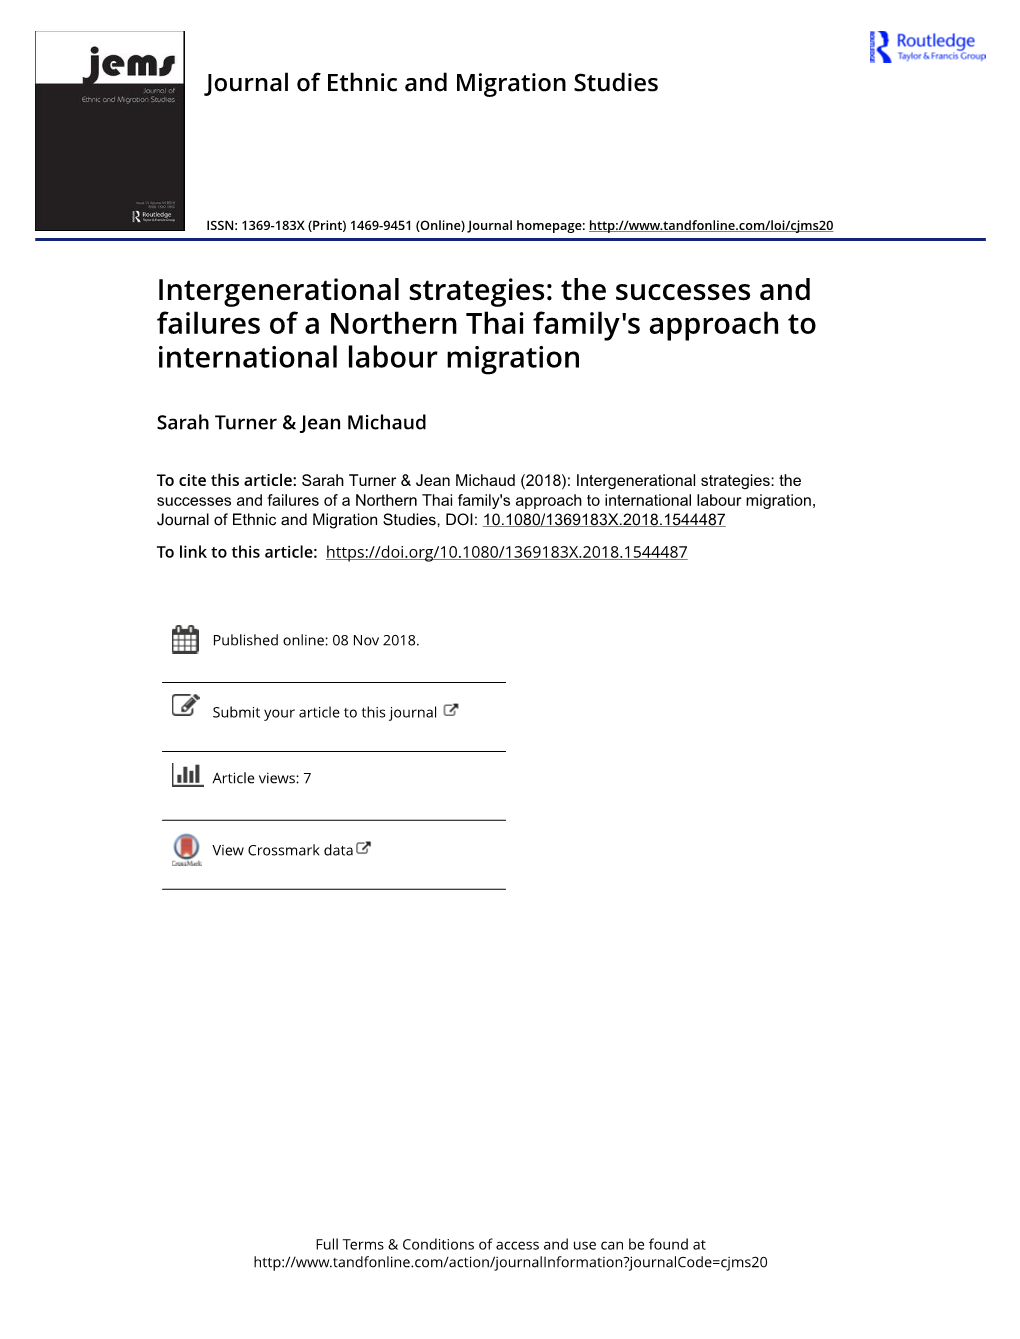 Intergenerational Strategies: the Successes and Failures of a Northern Thai Family's Approach to International Labour Migration